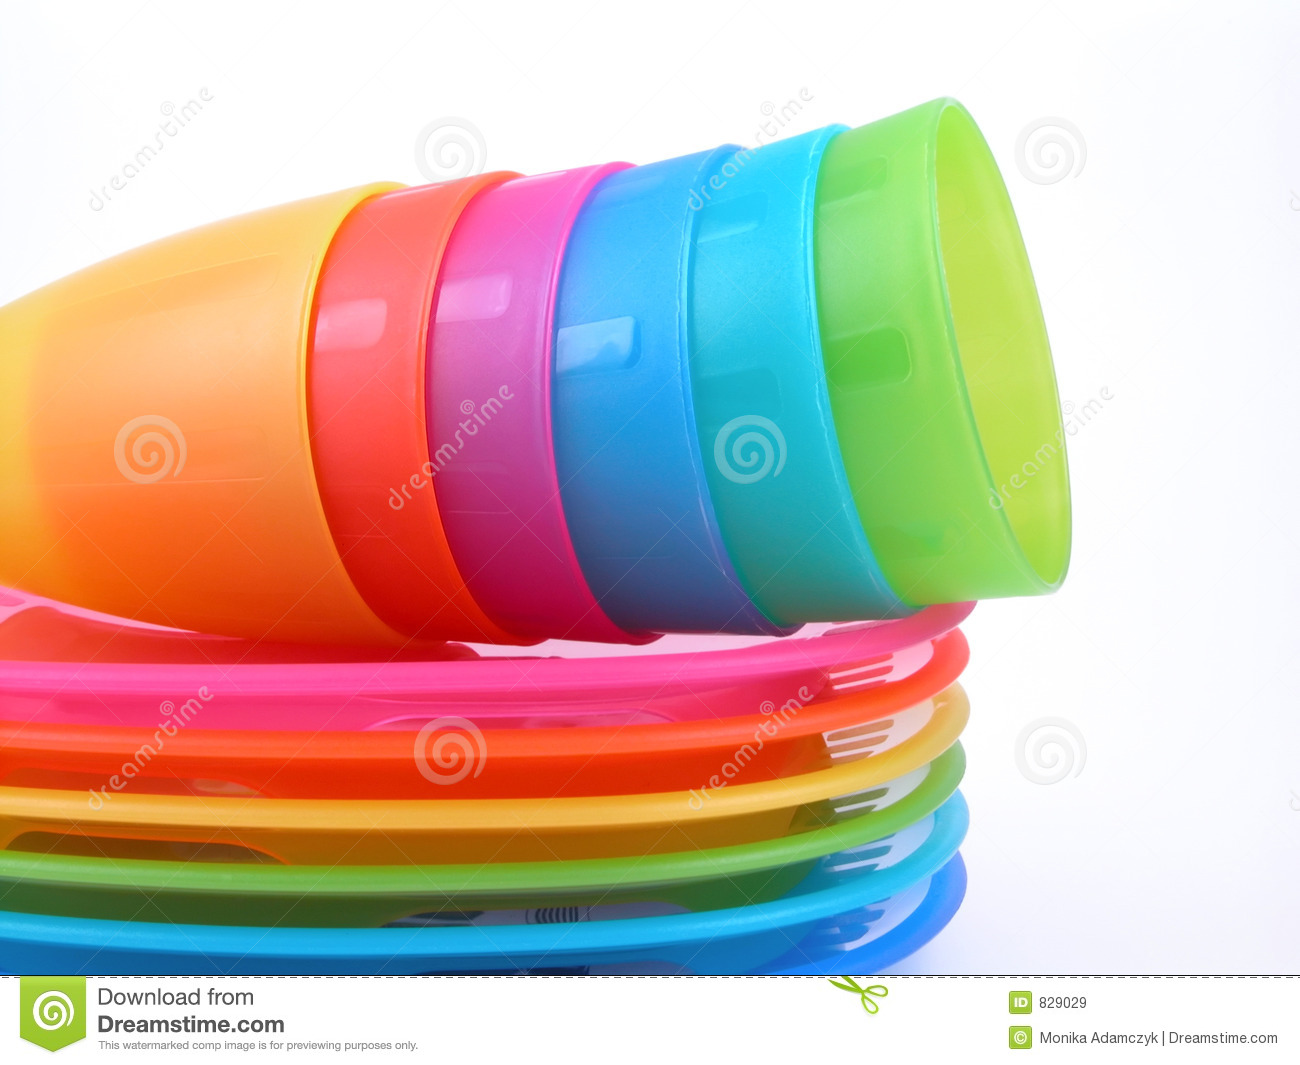 Plastic Cups And Plates Royalty Free Stock Images   Image  829029